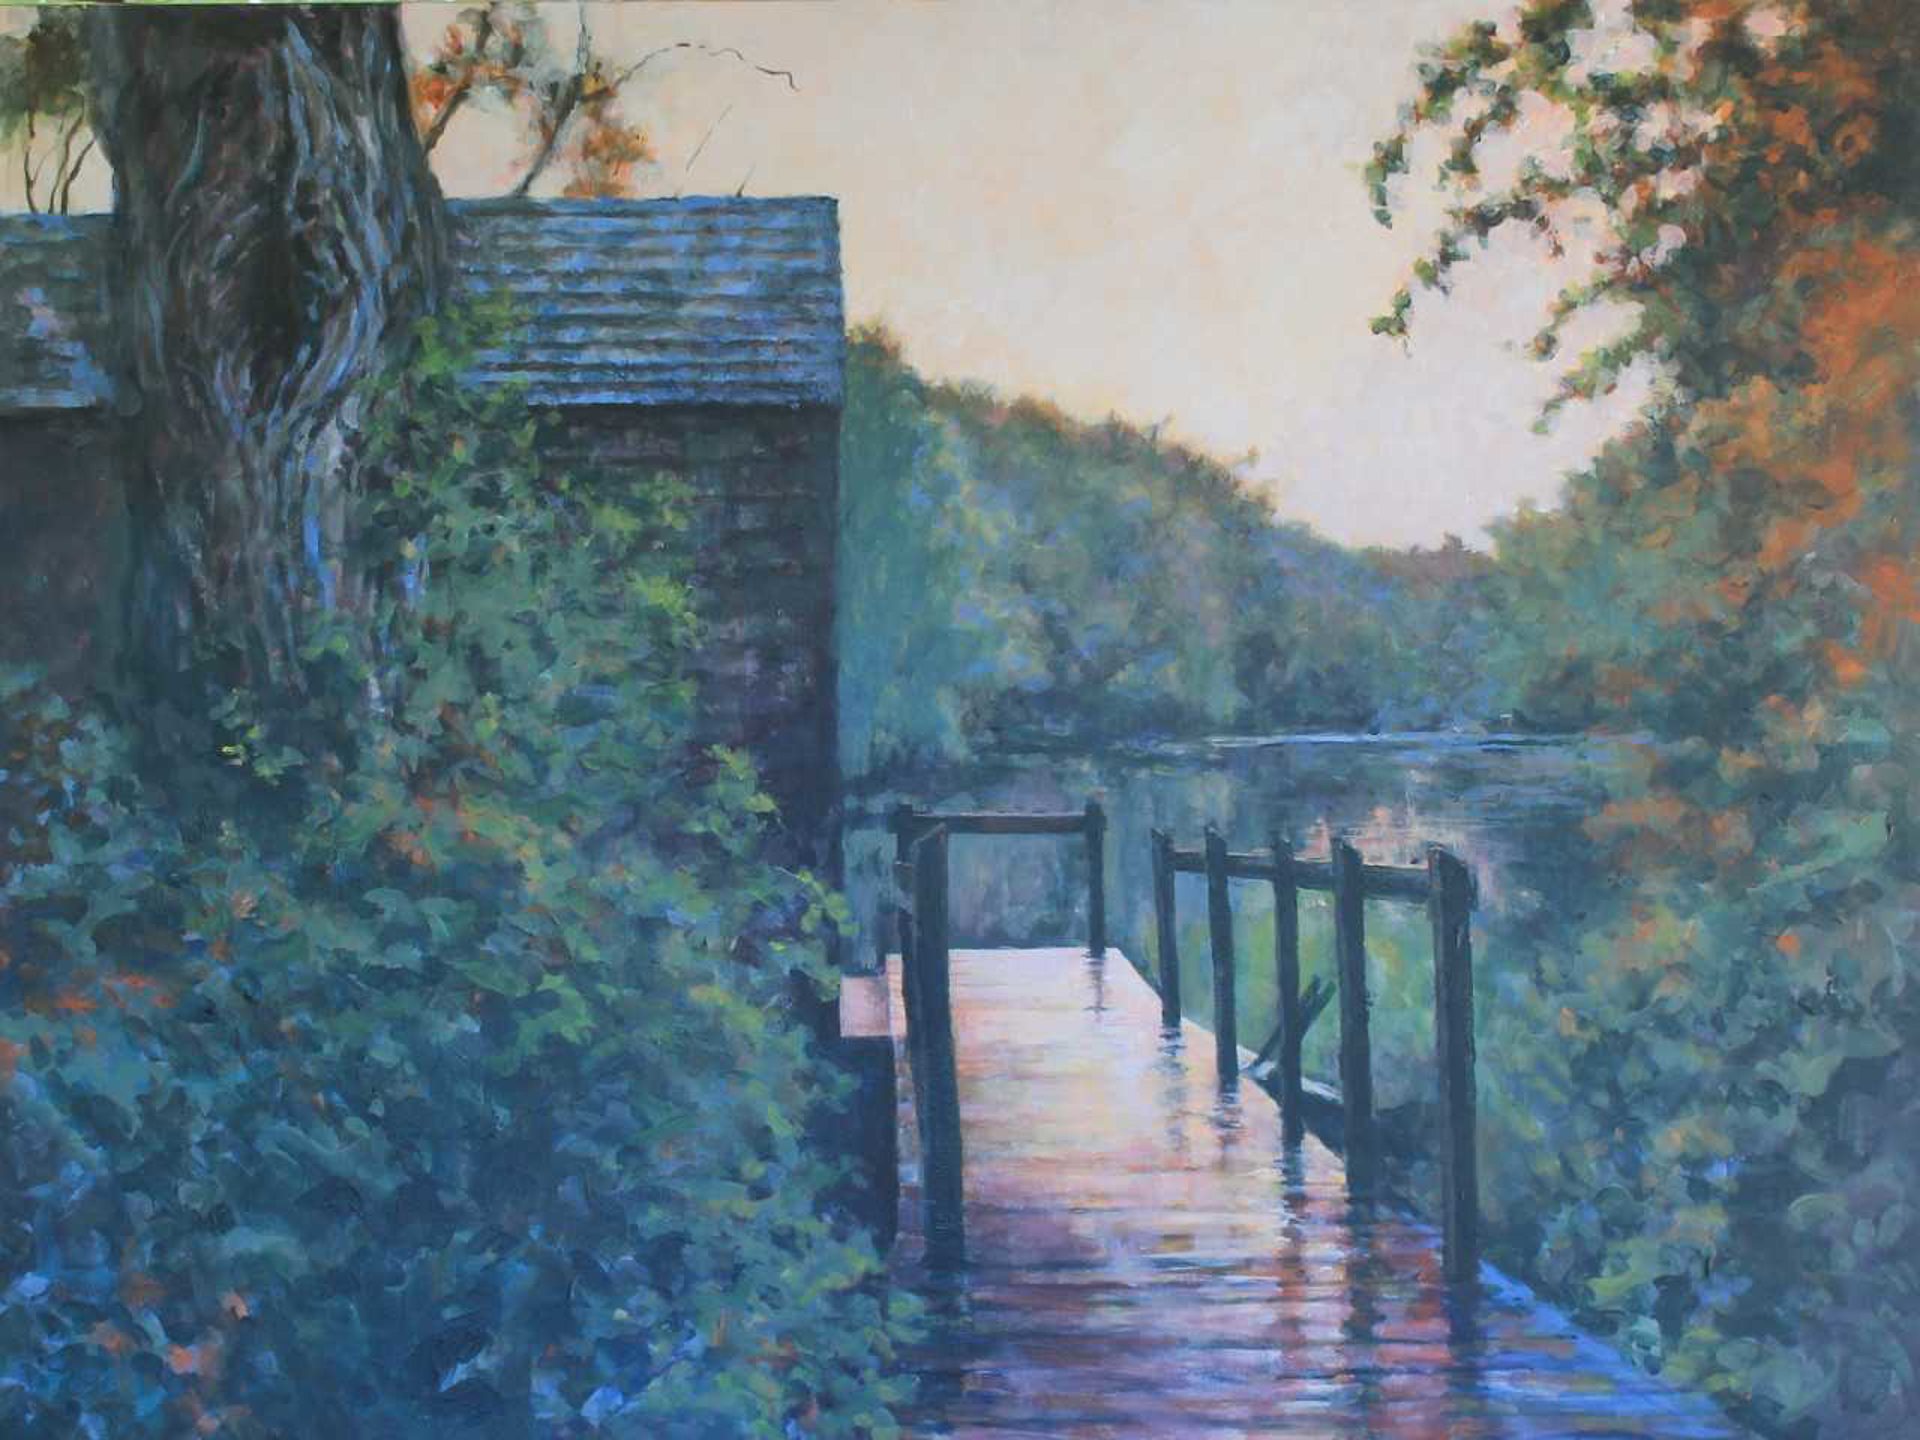 Boat Shed at Twilight by Douglas H. Caves Sr.